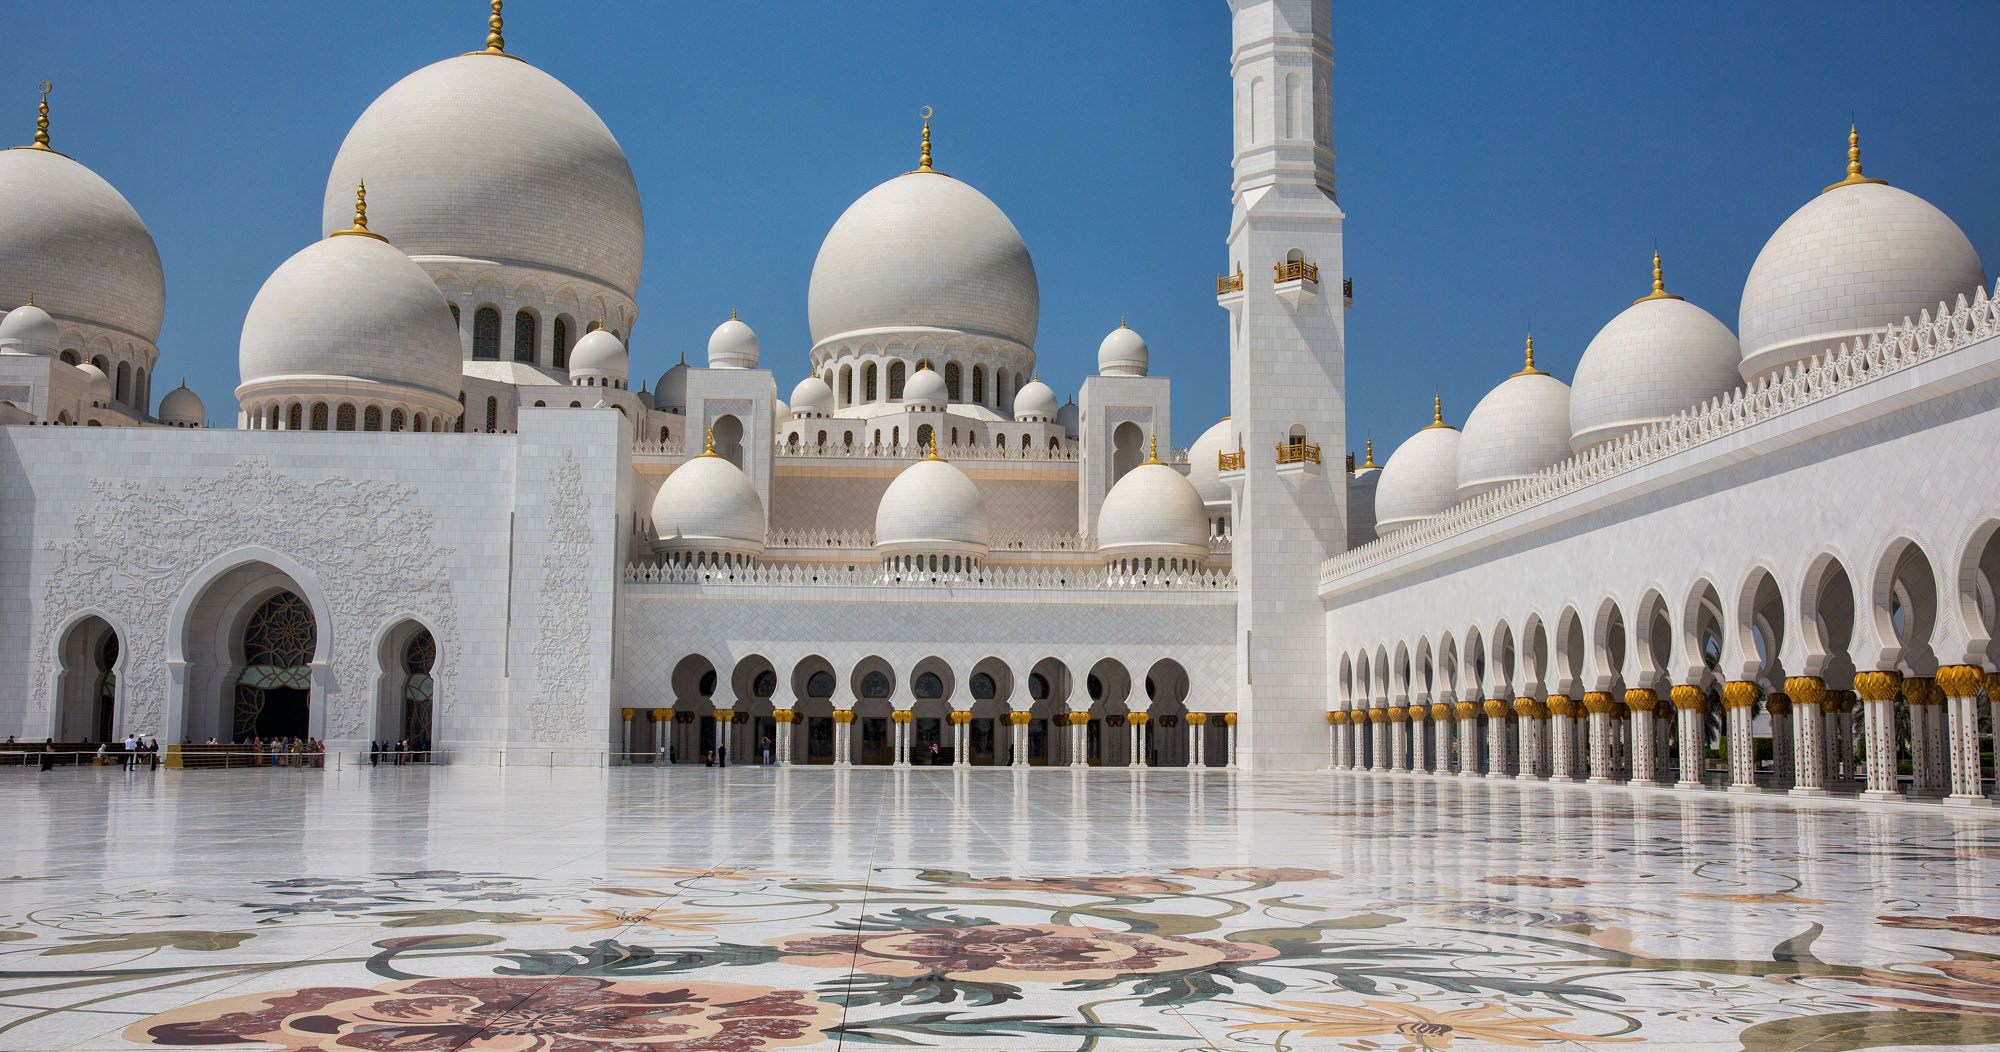 Featured image for “A Visit to the Sheikh Zayed Grand Mosque in Abu Dhabi”